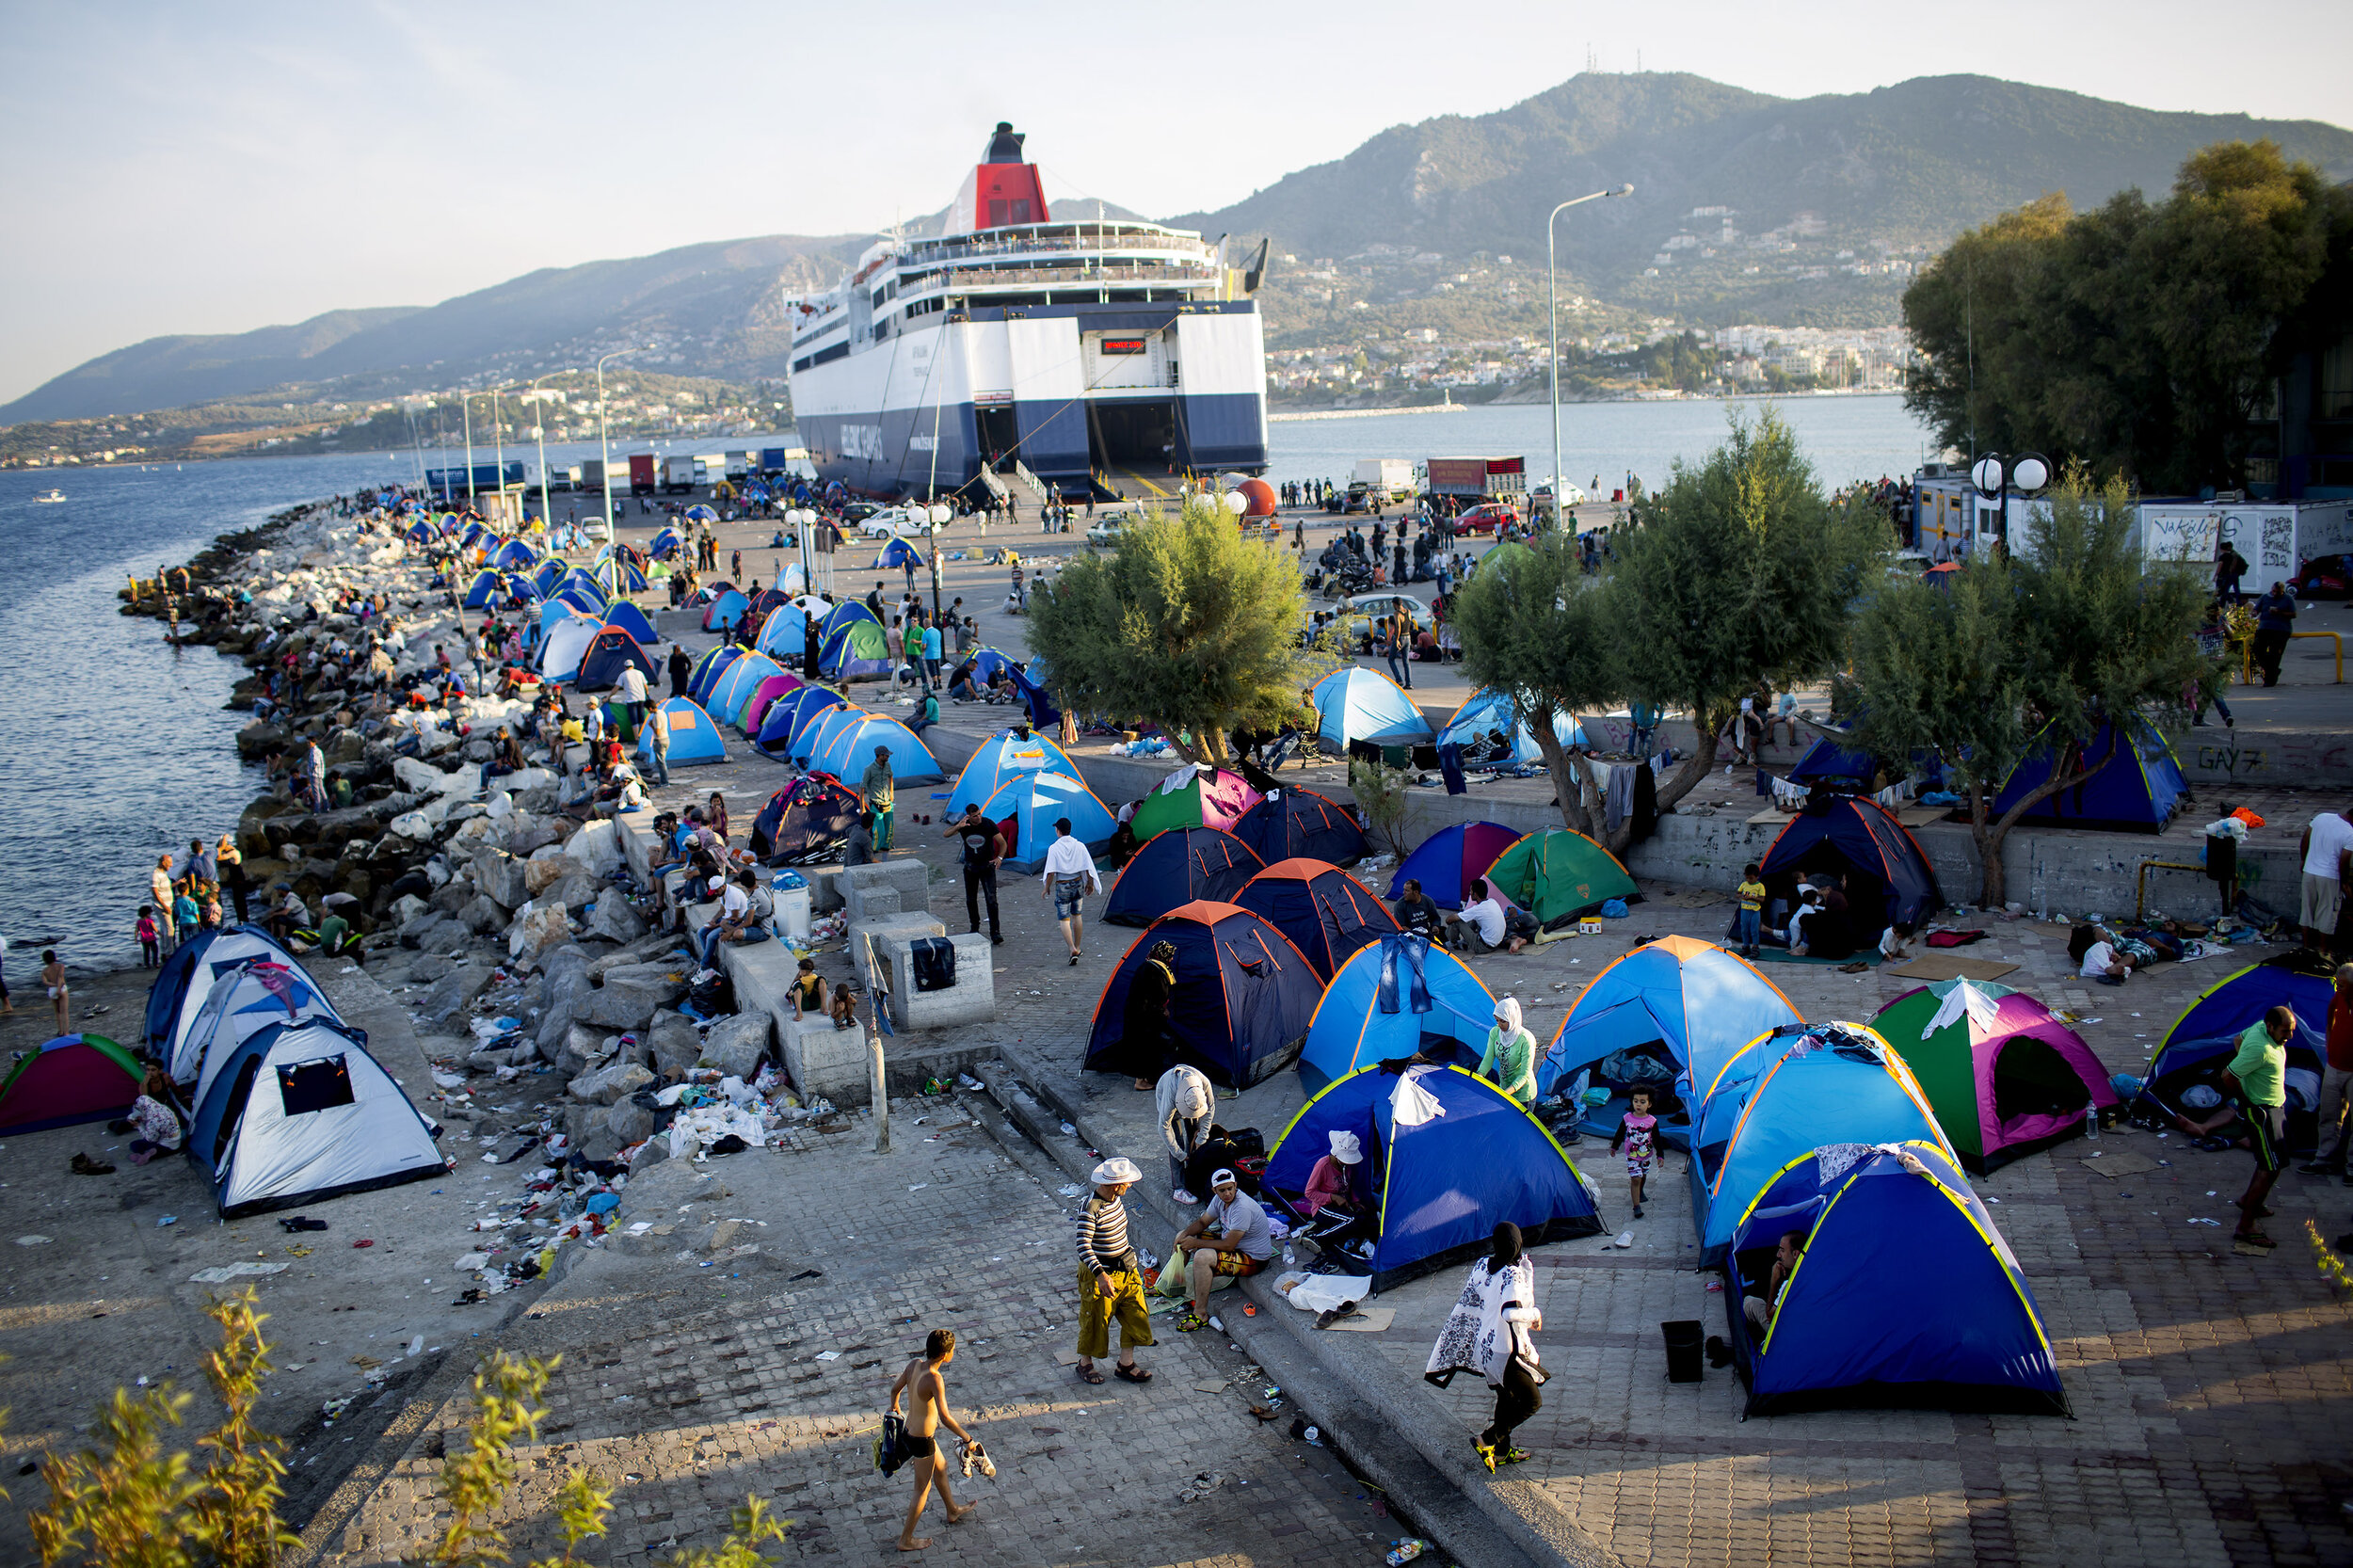   People who had come ashore from Turkey onto the Island of Lesvos, Greece camp as they wait for government permission to travel by ferry to Athens during a mass exodus from Syria. 2015  